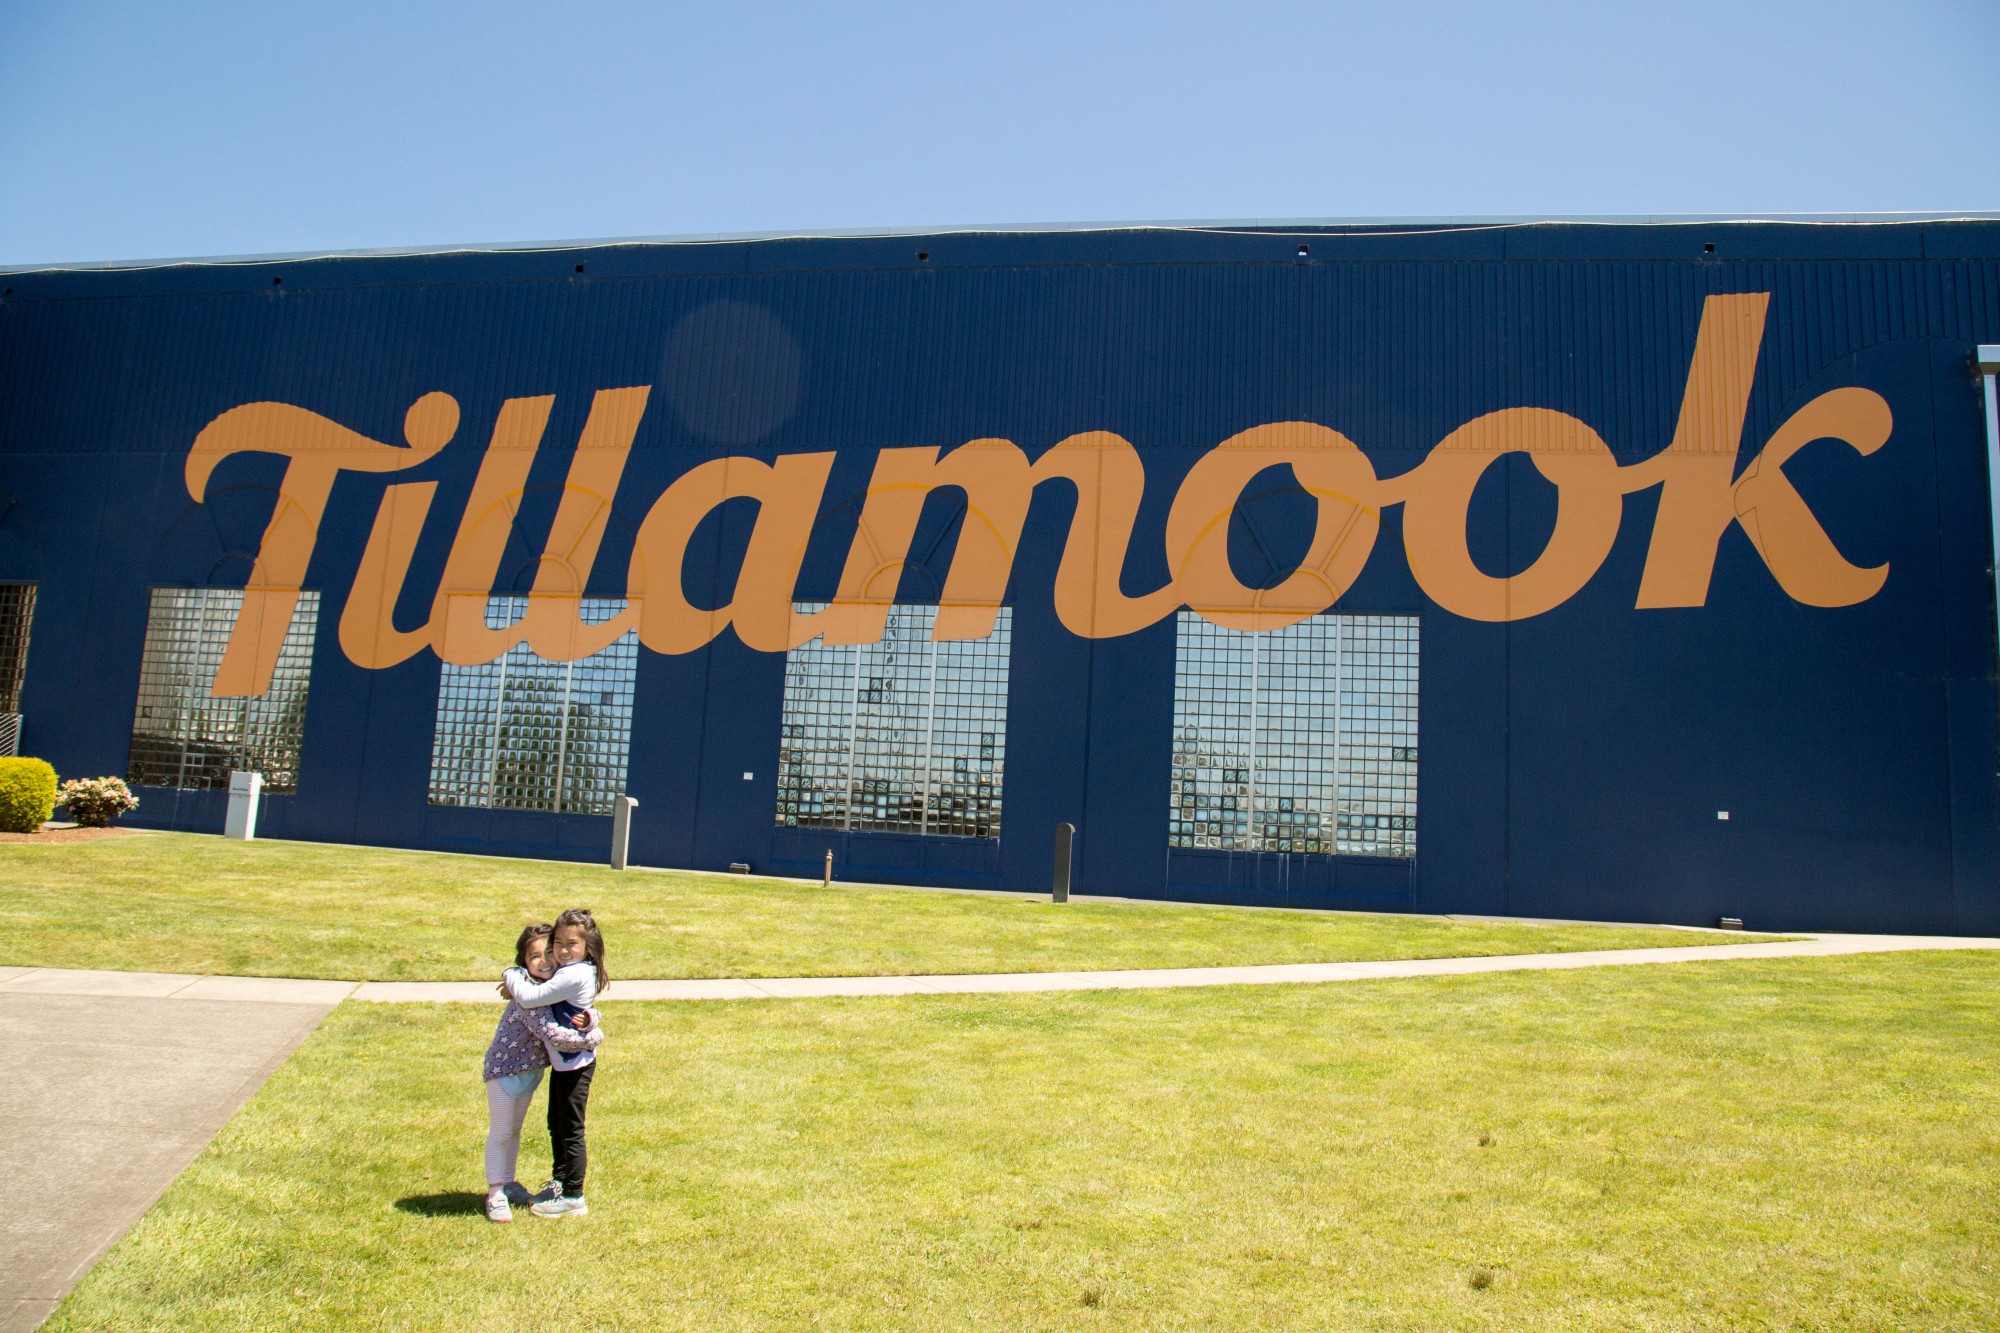 The next day we drove to the Tillamook factory and got lots of cheese samples, but we didn't really like their grilled cheese sandwiches or ice cream.